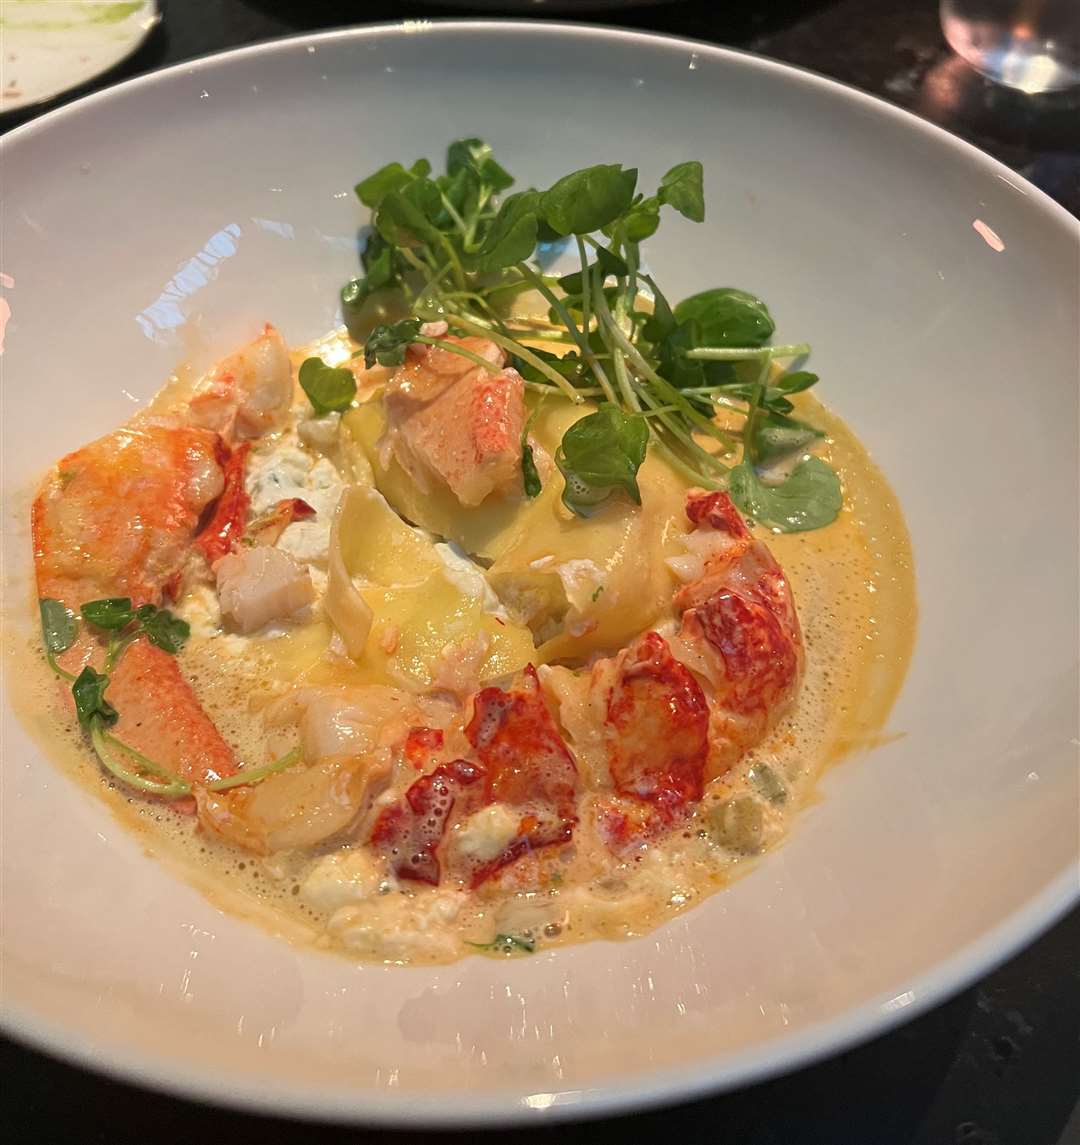 My open ravioli of North Sea lobster served with a langoustine gravy